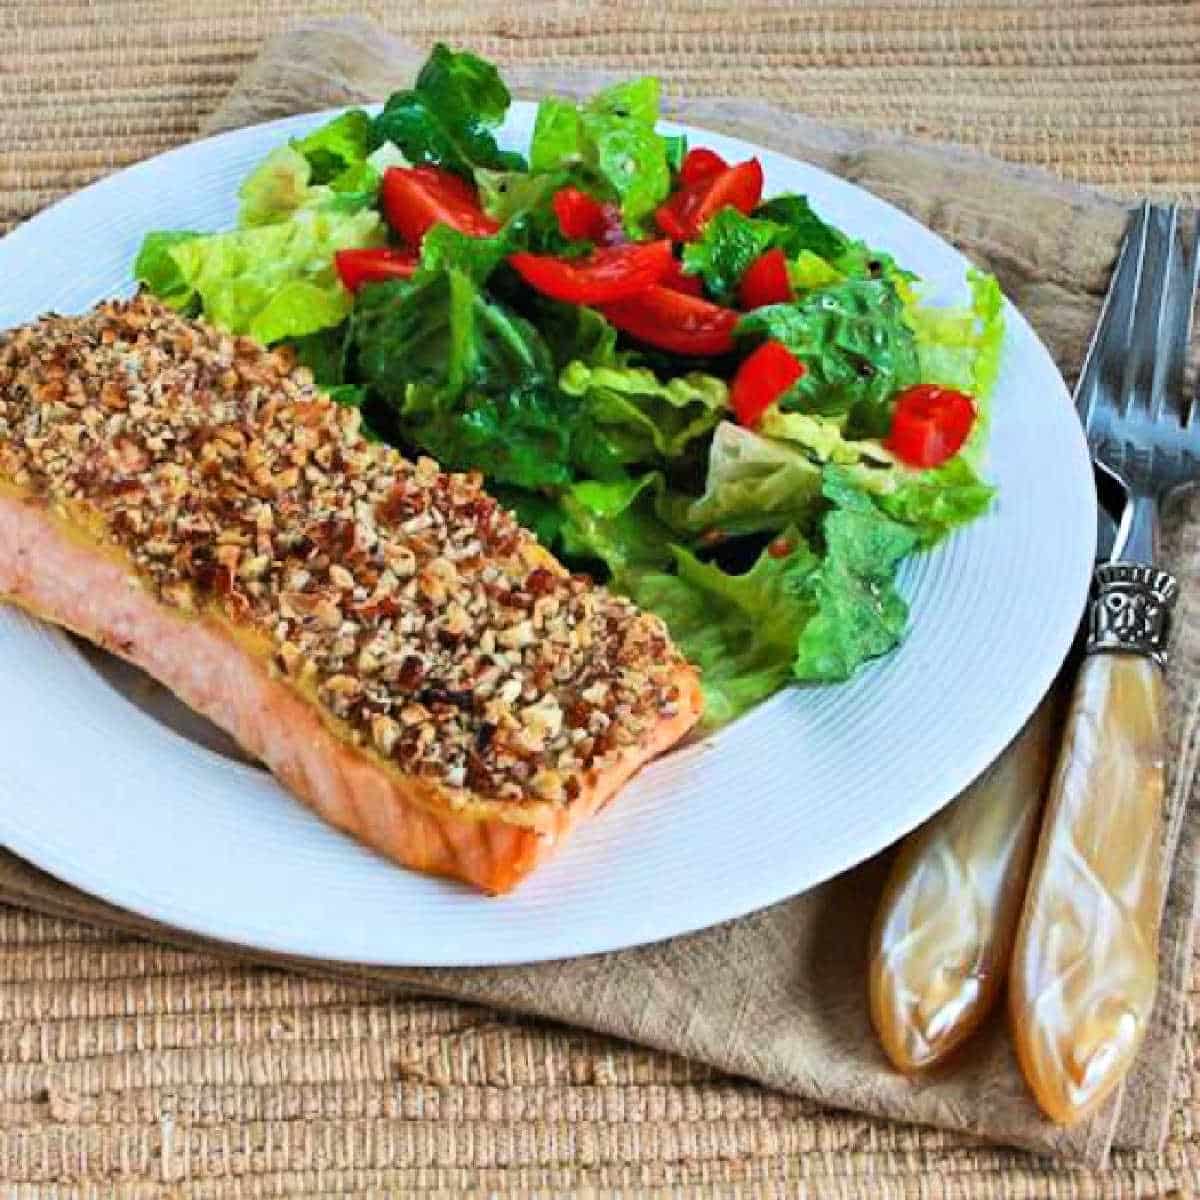 Square image of Pecan Crusted Salmon shown on serving plate with salad.